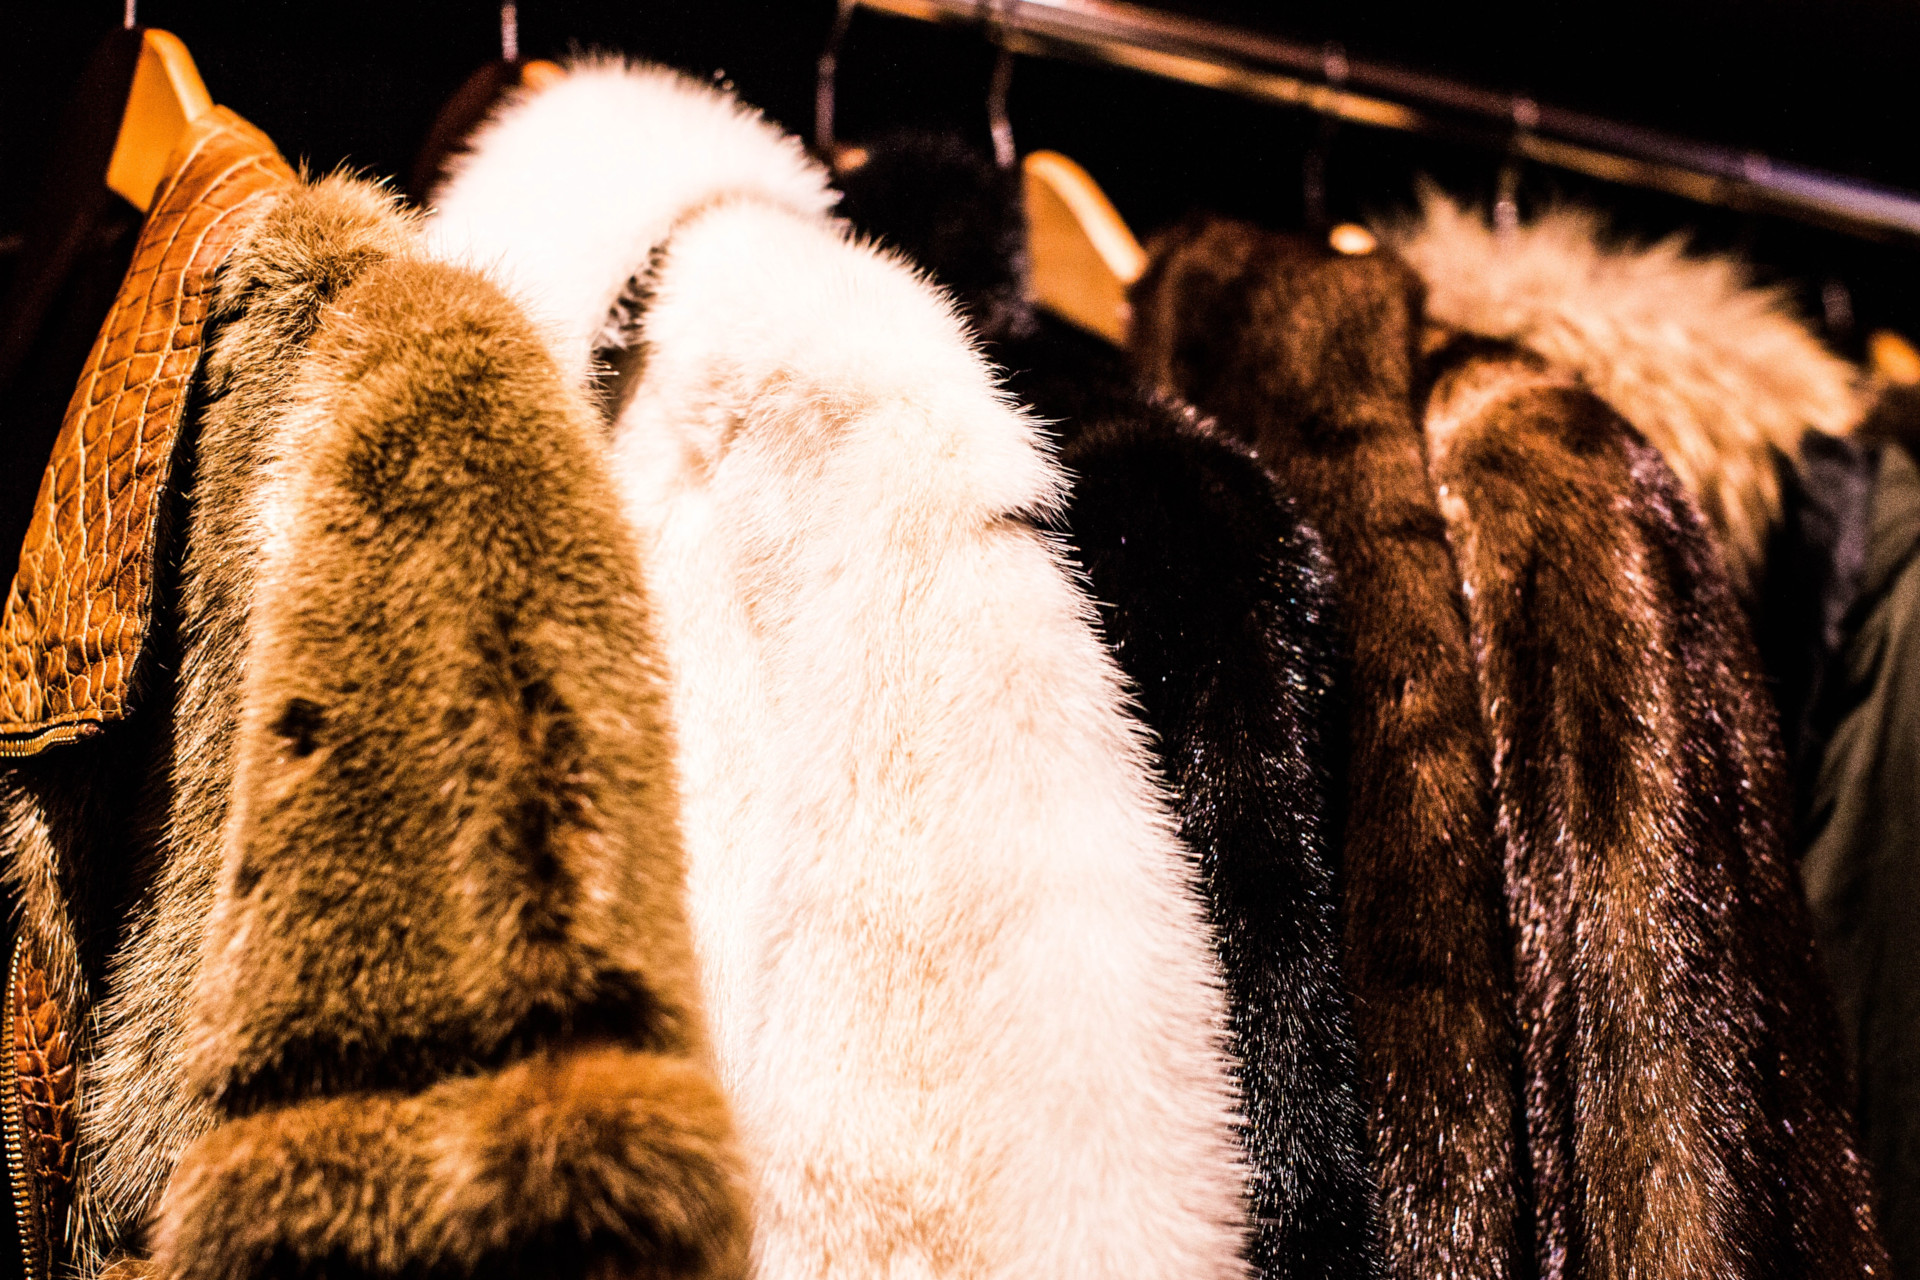 Rail of fur coats on shades of brown, cream and black